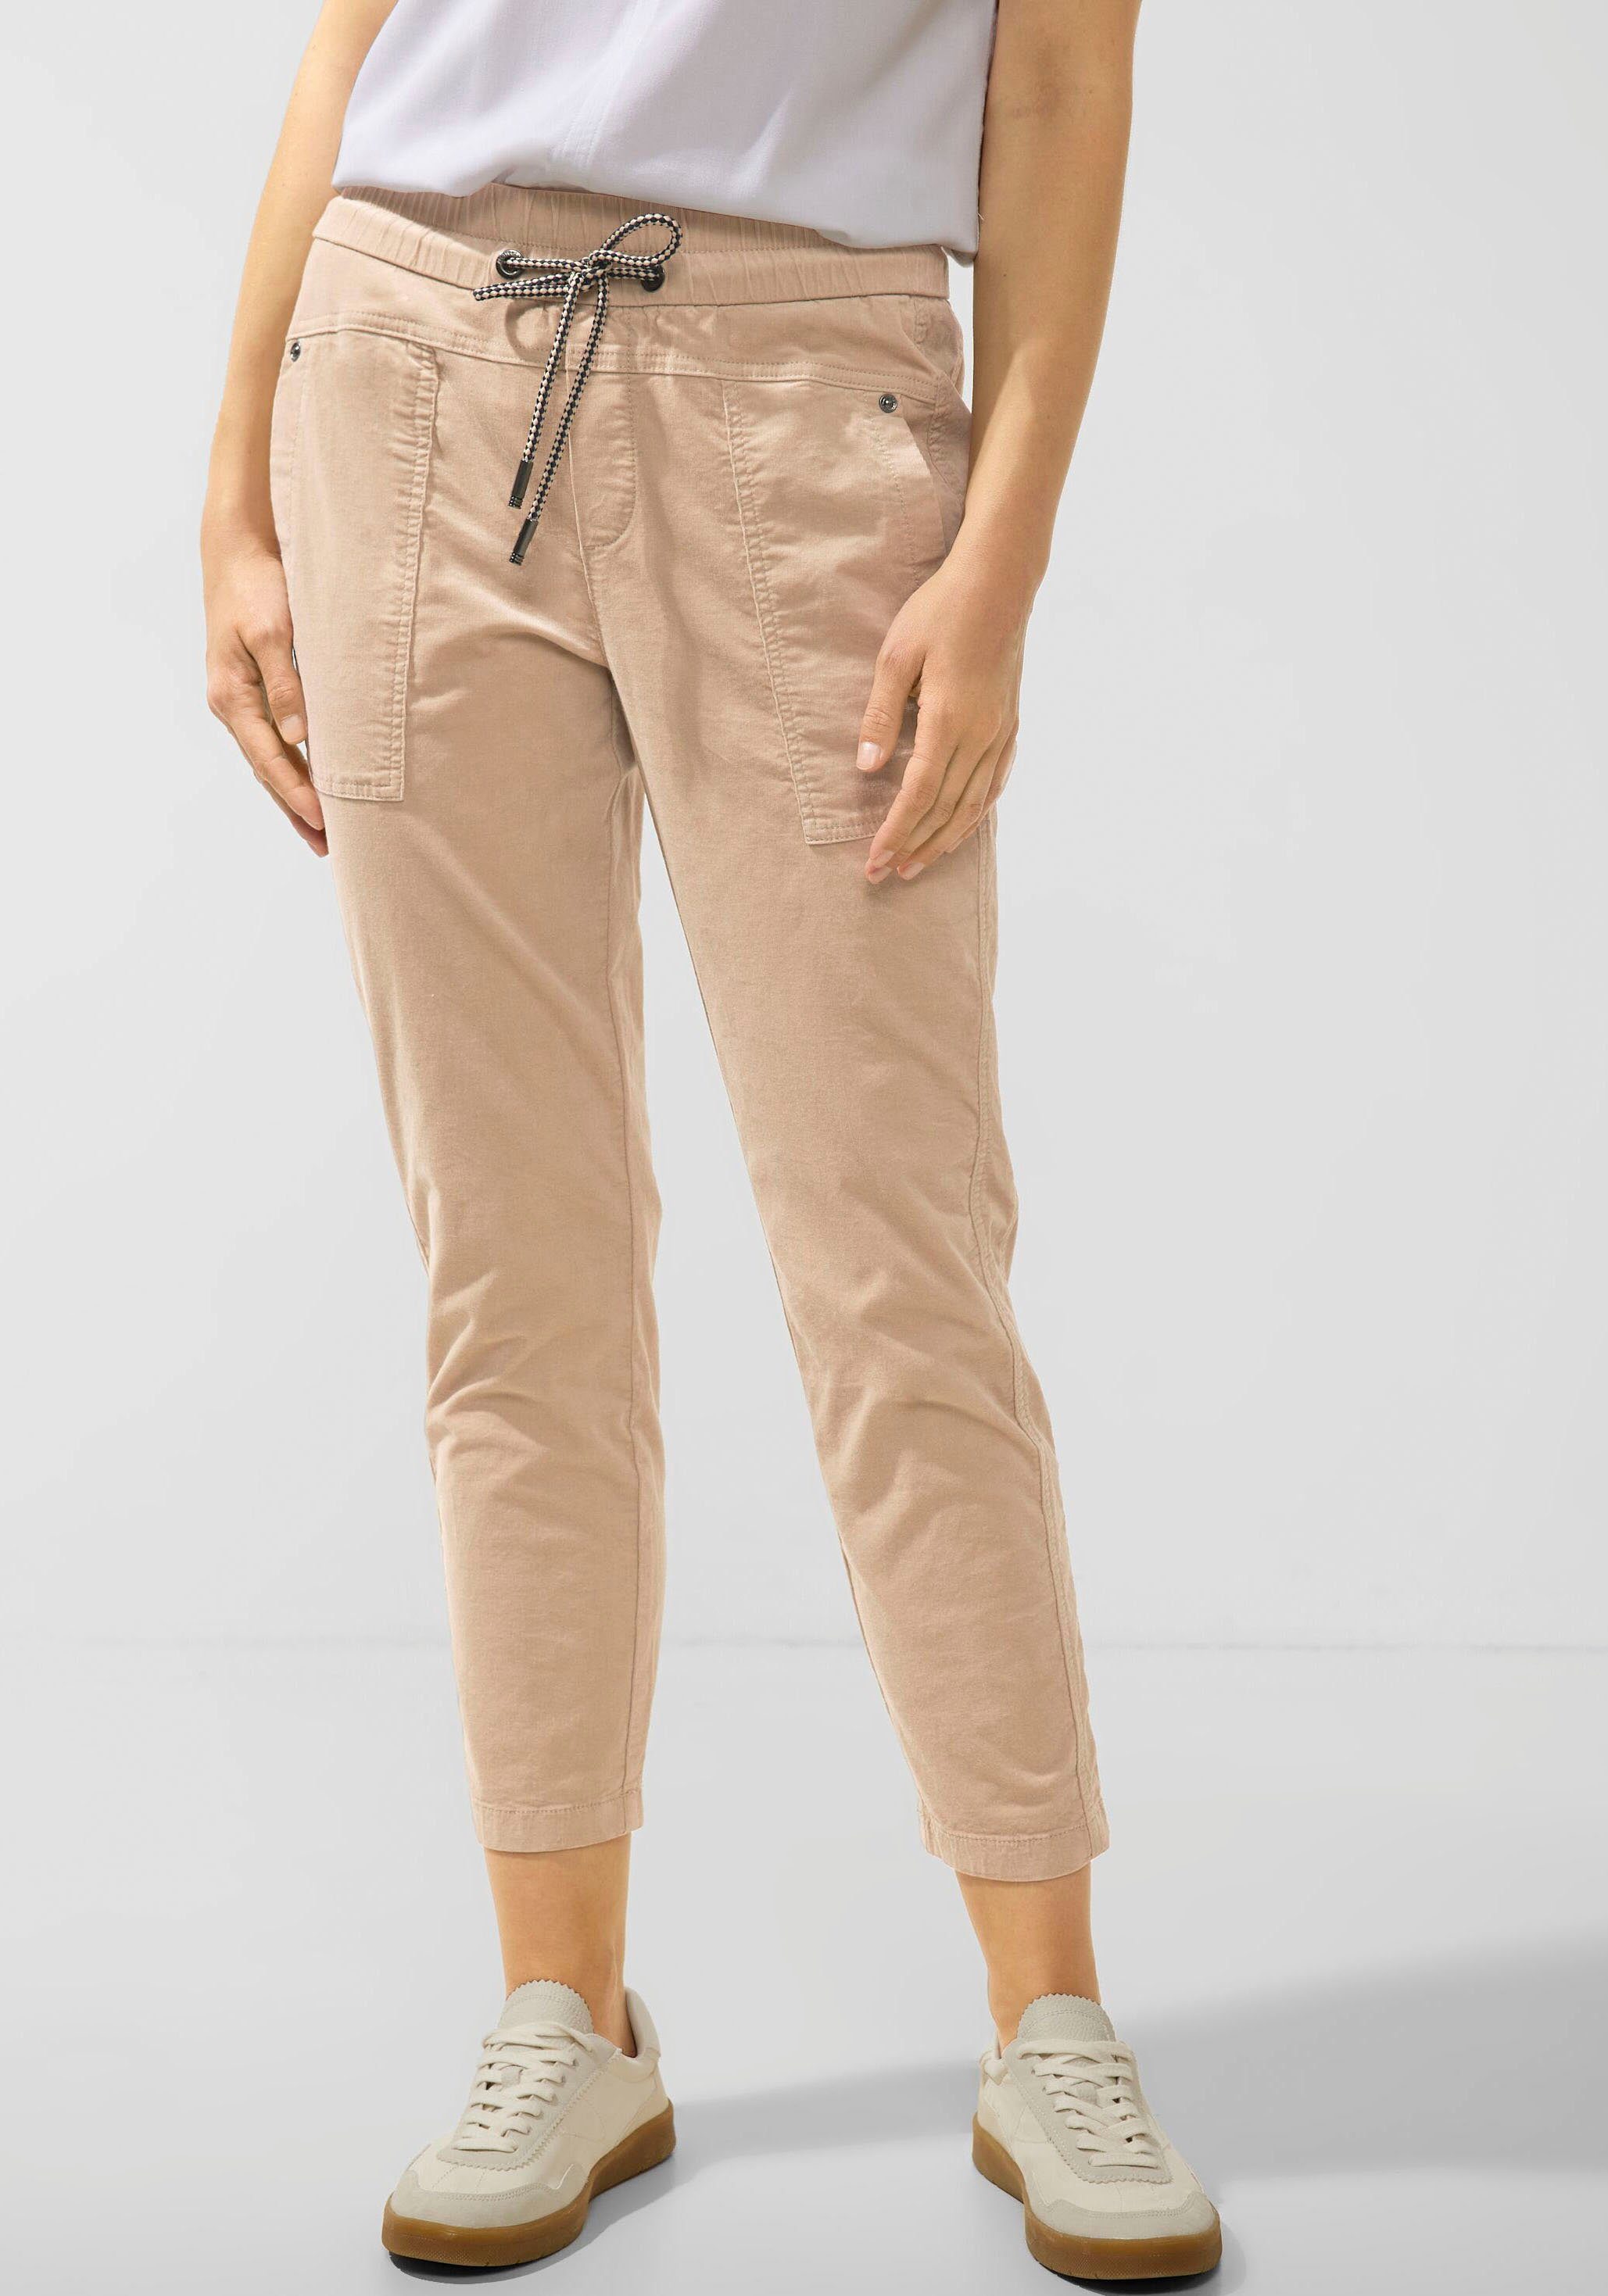 STREET ONE Cordhose mit Metalllabel dull bleached sand